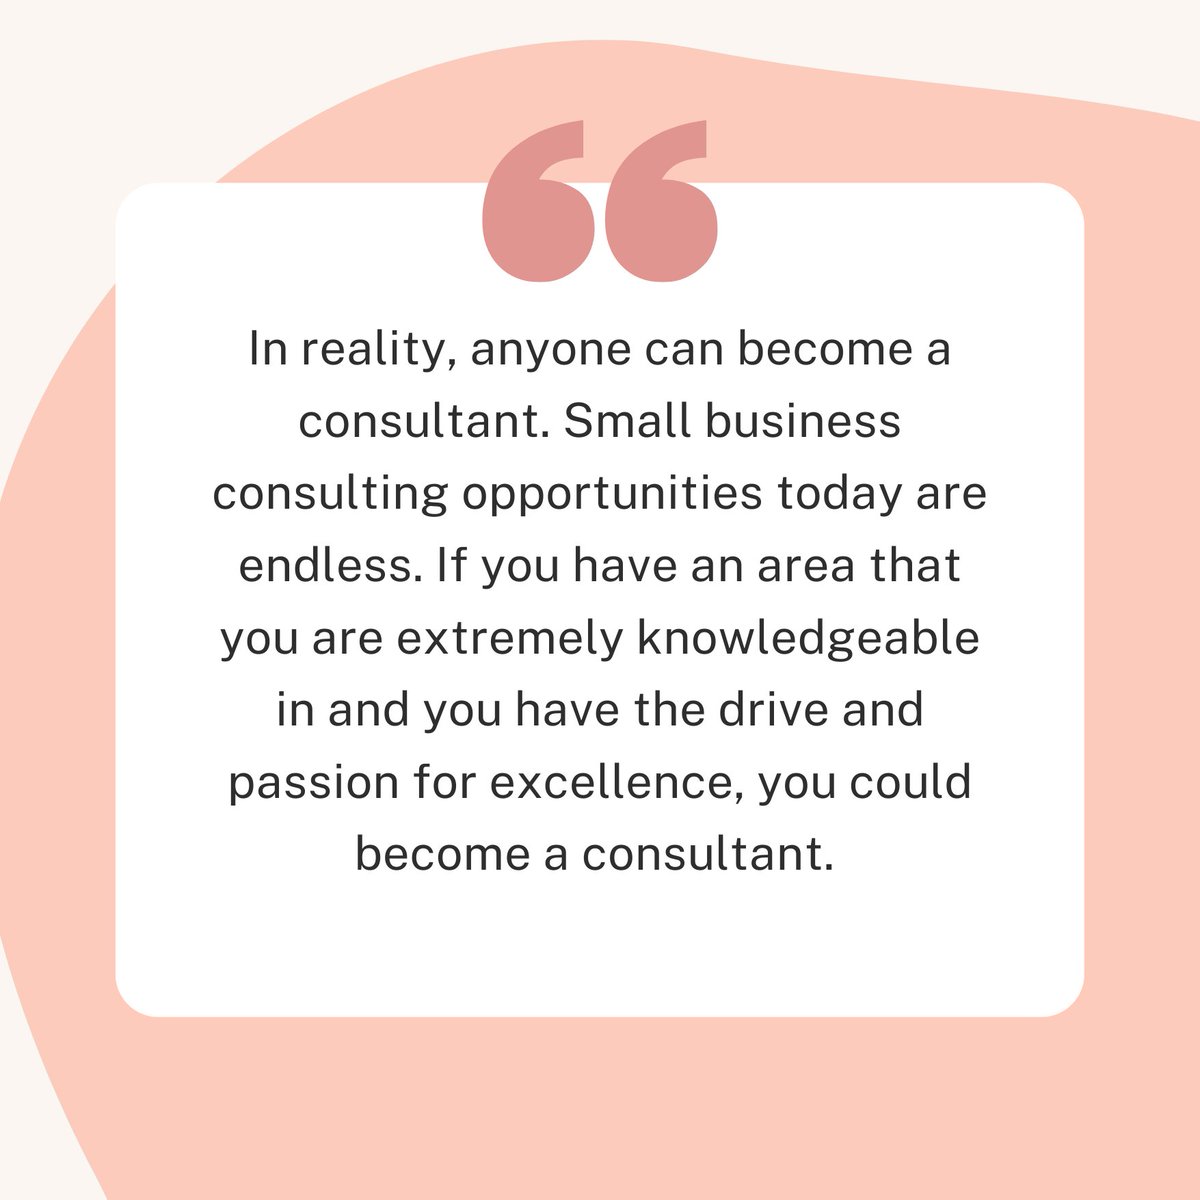 Empower yourself to become a small business consultant – it's a journey open to everyone! 💼✨ Unlock the potential to make a meaningful impact.

#SmallBusinessConsulting #ConsultantLife #BusinessAdvice #ConsultingSuccess #BusinessStrategy